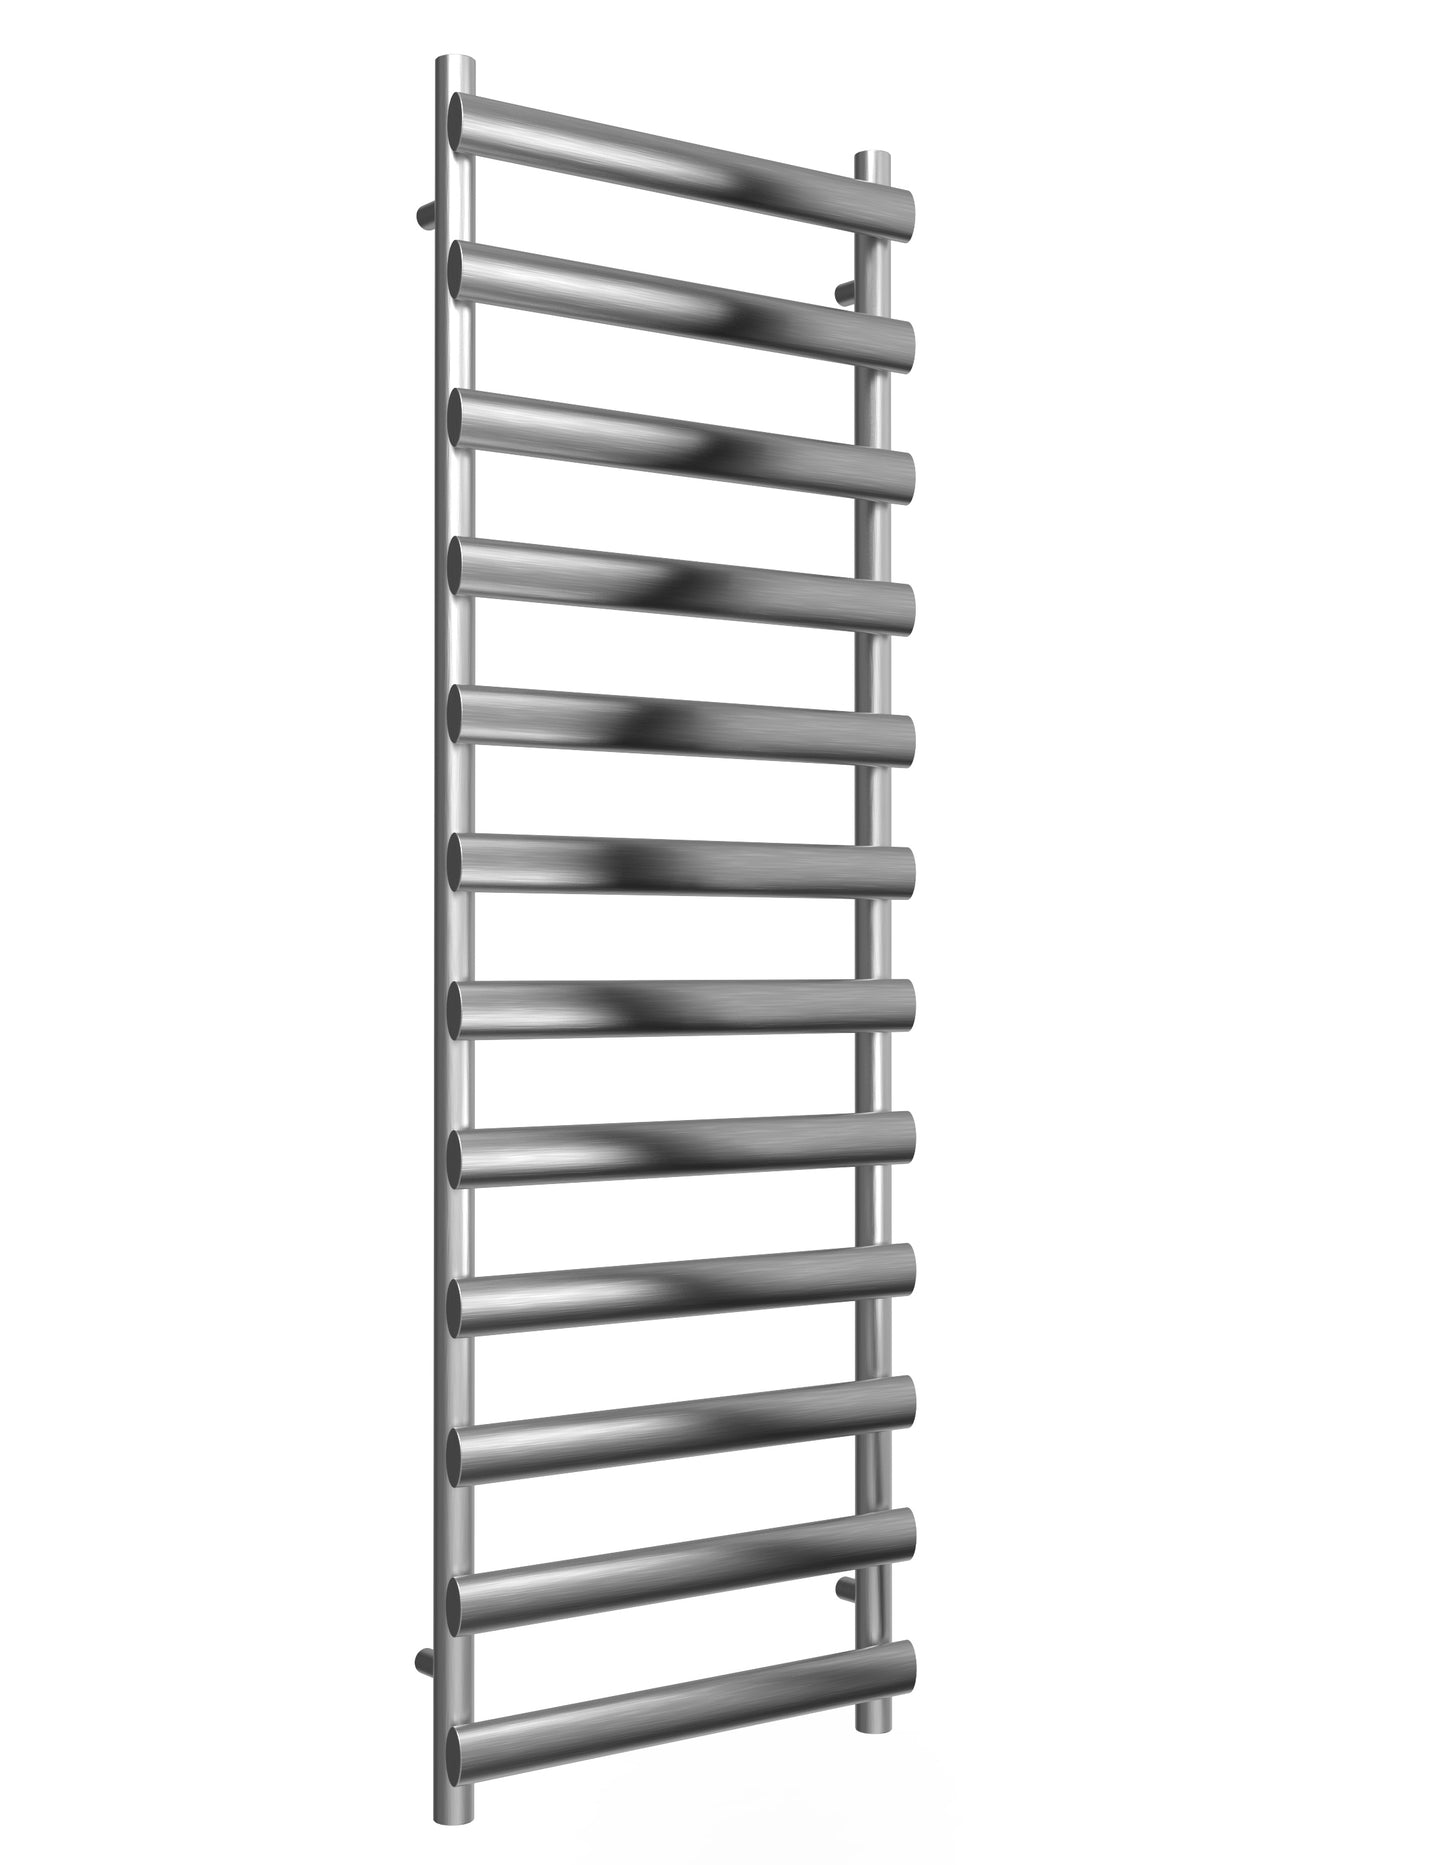 Deno Electric Stainless Steel Heated Towel Rail - Various Sizes - Satin Finish